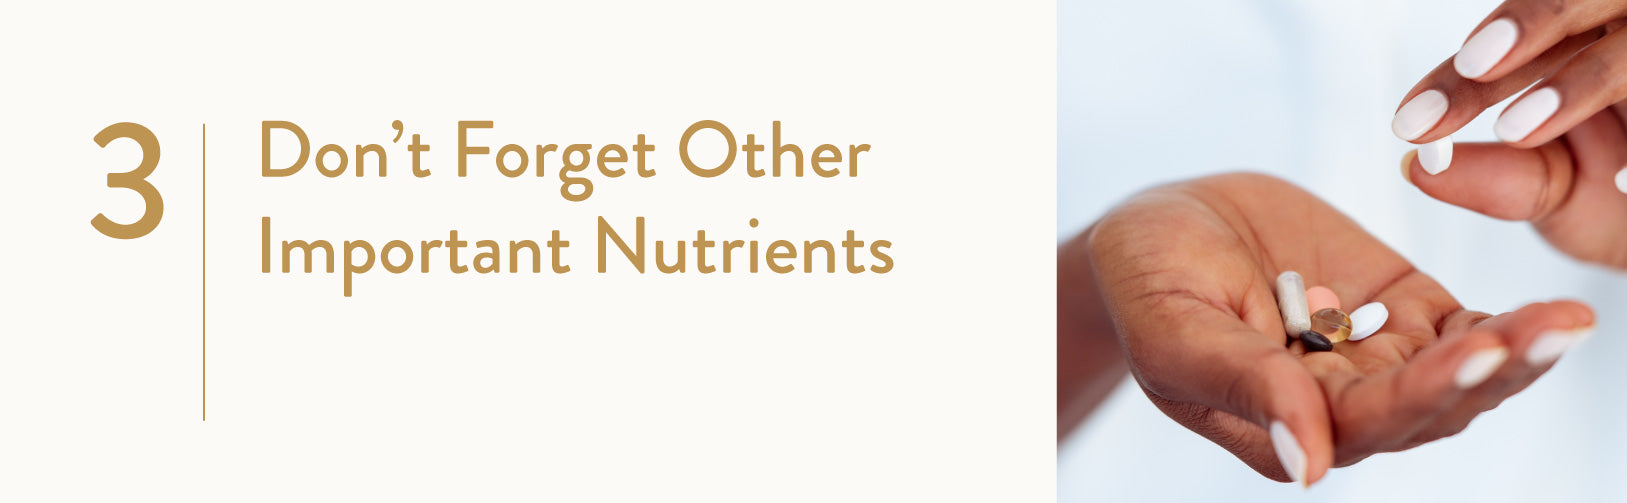 3. Don’t Forget Other Important Nutrients